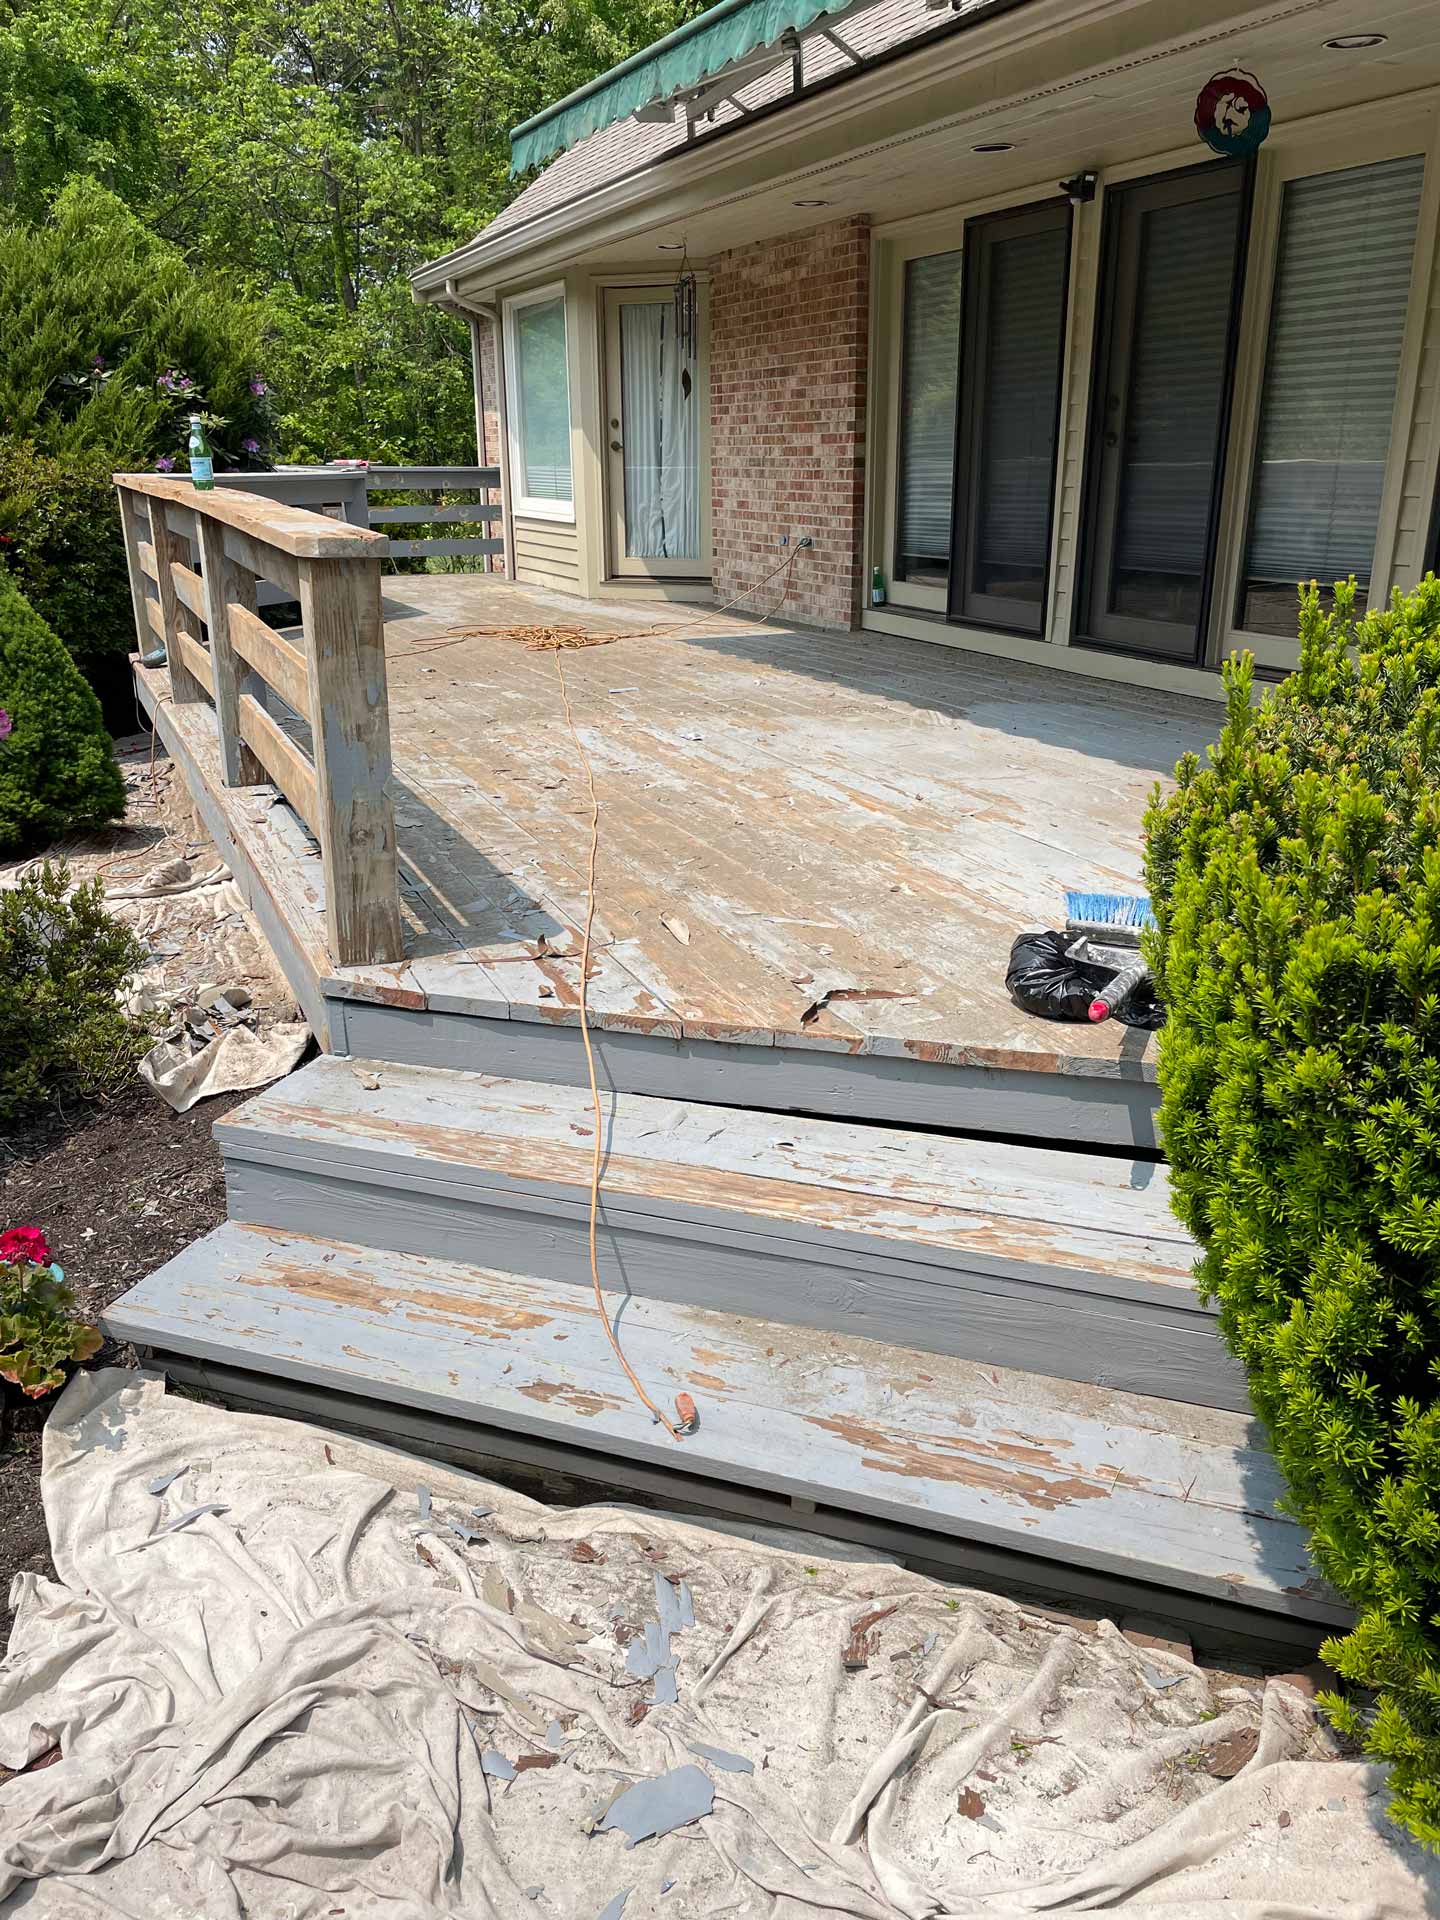 An old, dirty deck with chipped grey paint